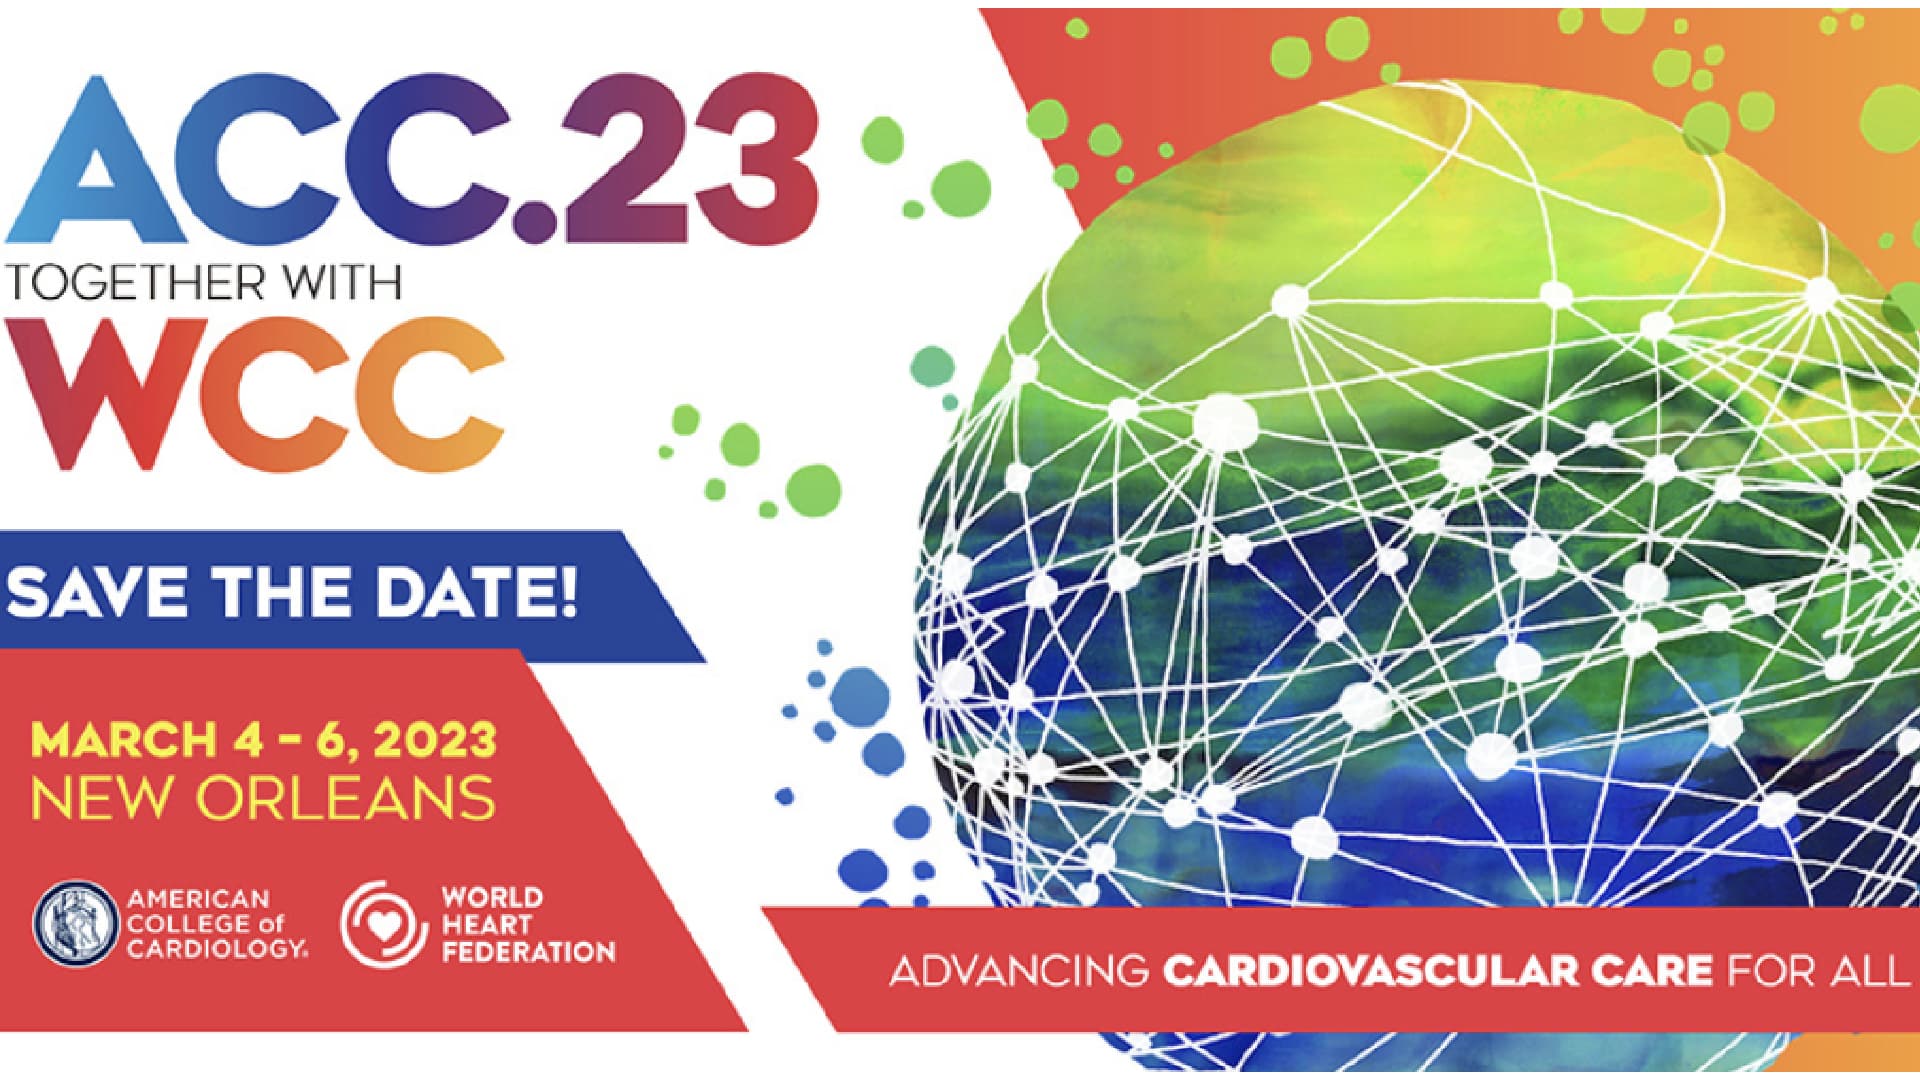 American College of Cardiology (ACC) Congress 2023